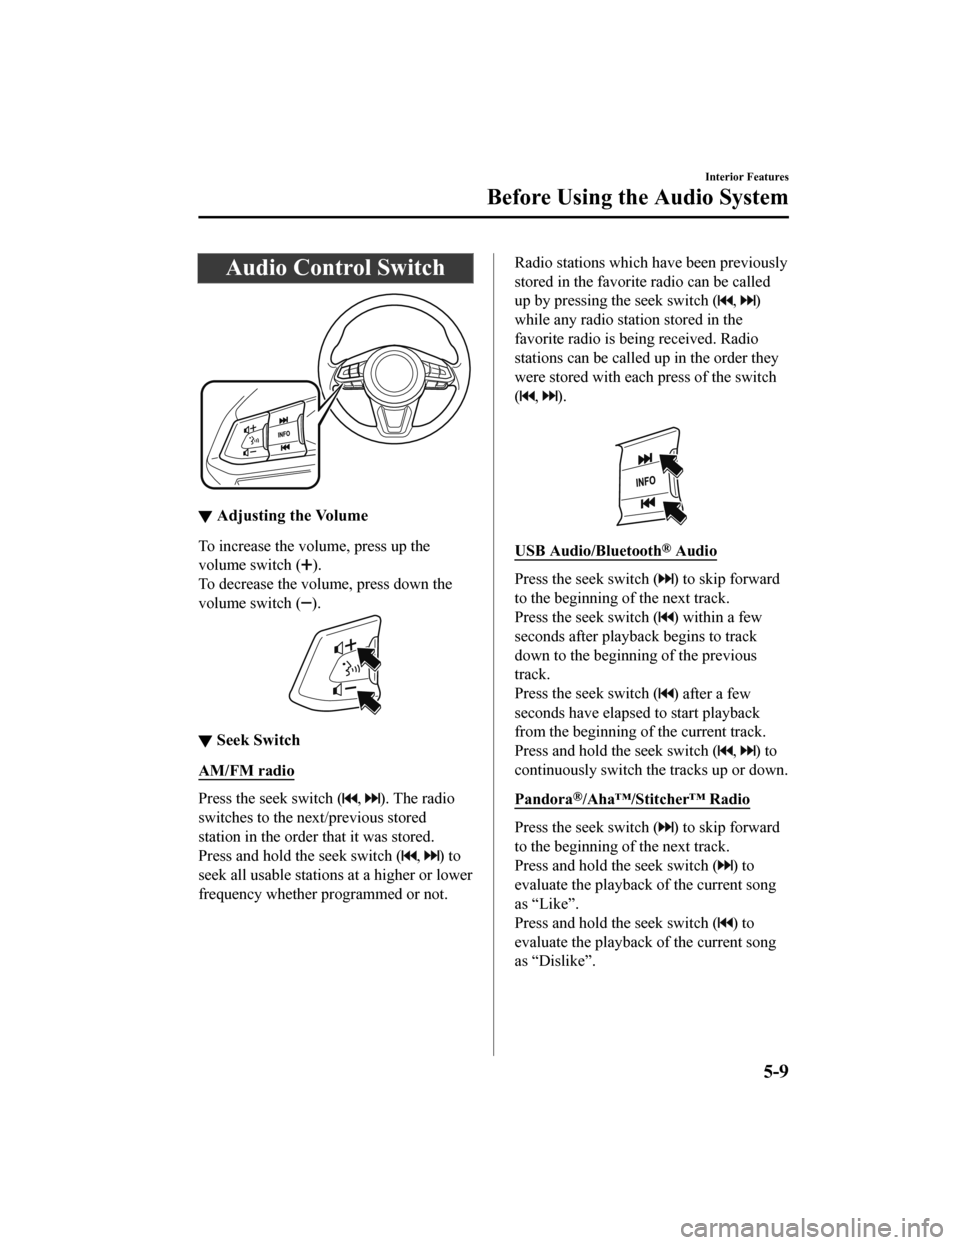 MAZDA MODEL 6 2019  Owners Manual (in English) Audio Control Switch
▼Adjusting the Volume
To increase the volume, press up the
volume switch (
).
To decrease the volume, press down the
volume switch (
).
▼ Seek Switch
AM/FM radio
Press the see